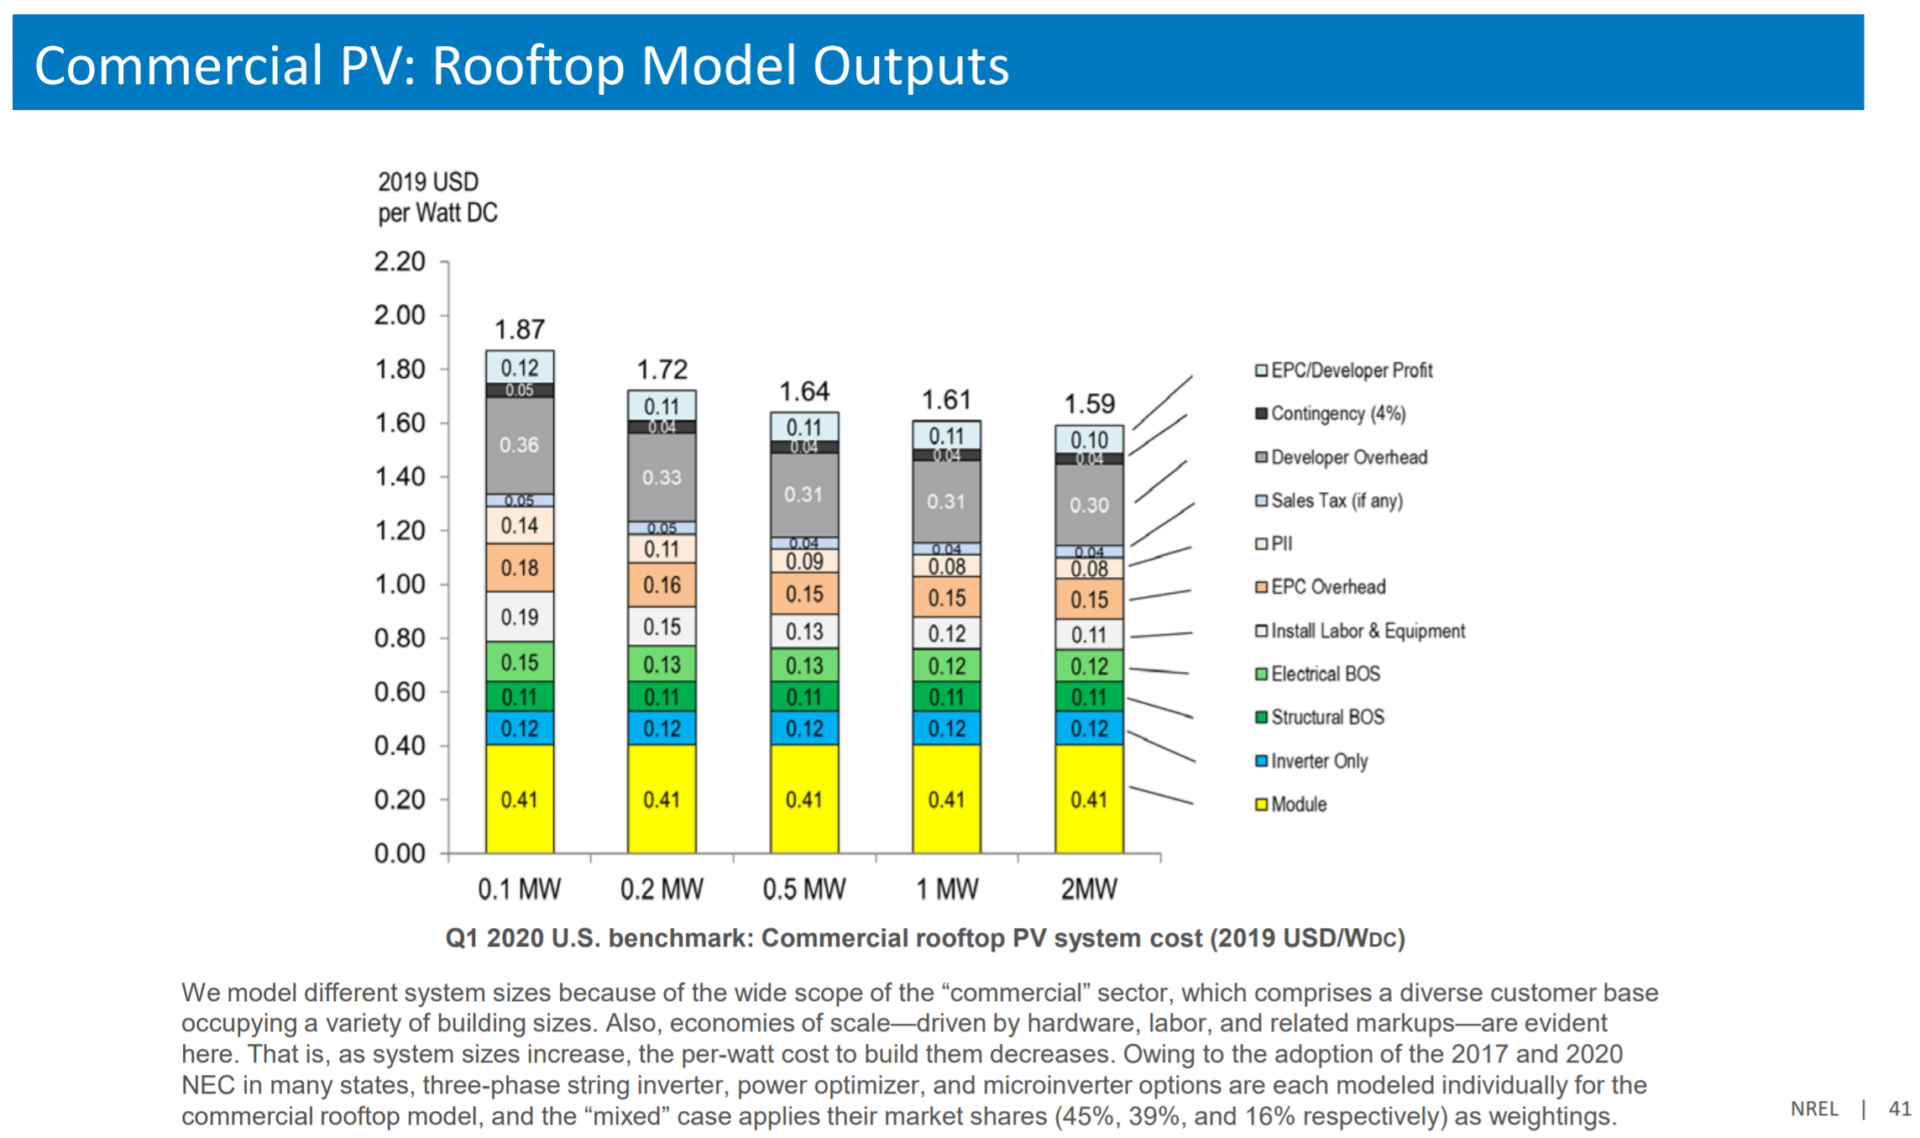 Stacked bar graph illustrates the price per watt of commercial rooftop PV systems, 0.1 MW cost $1.87 per watt, .2 MW $1.72 per watt, and 2 MW cost $1.59 per watt.